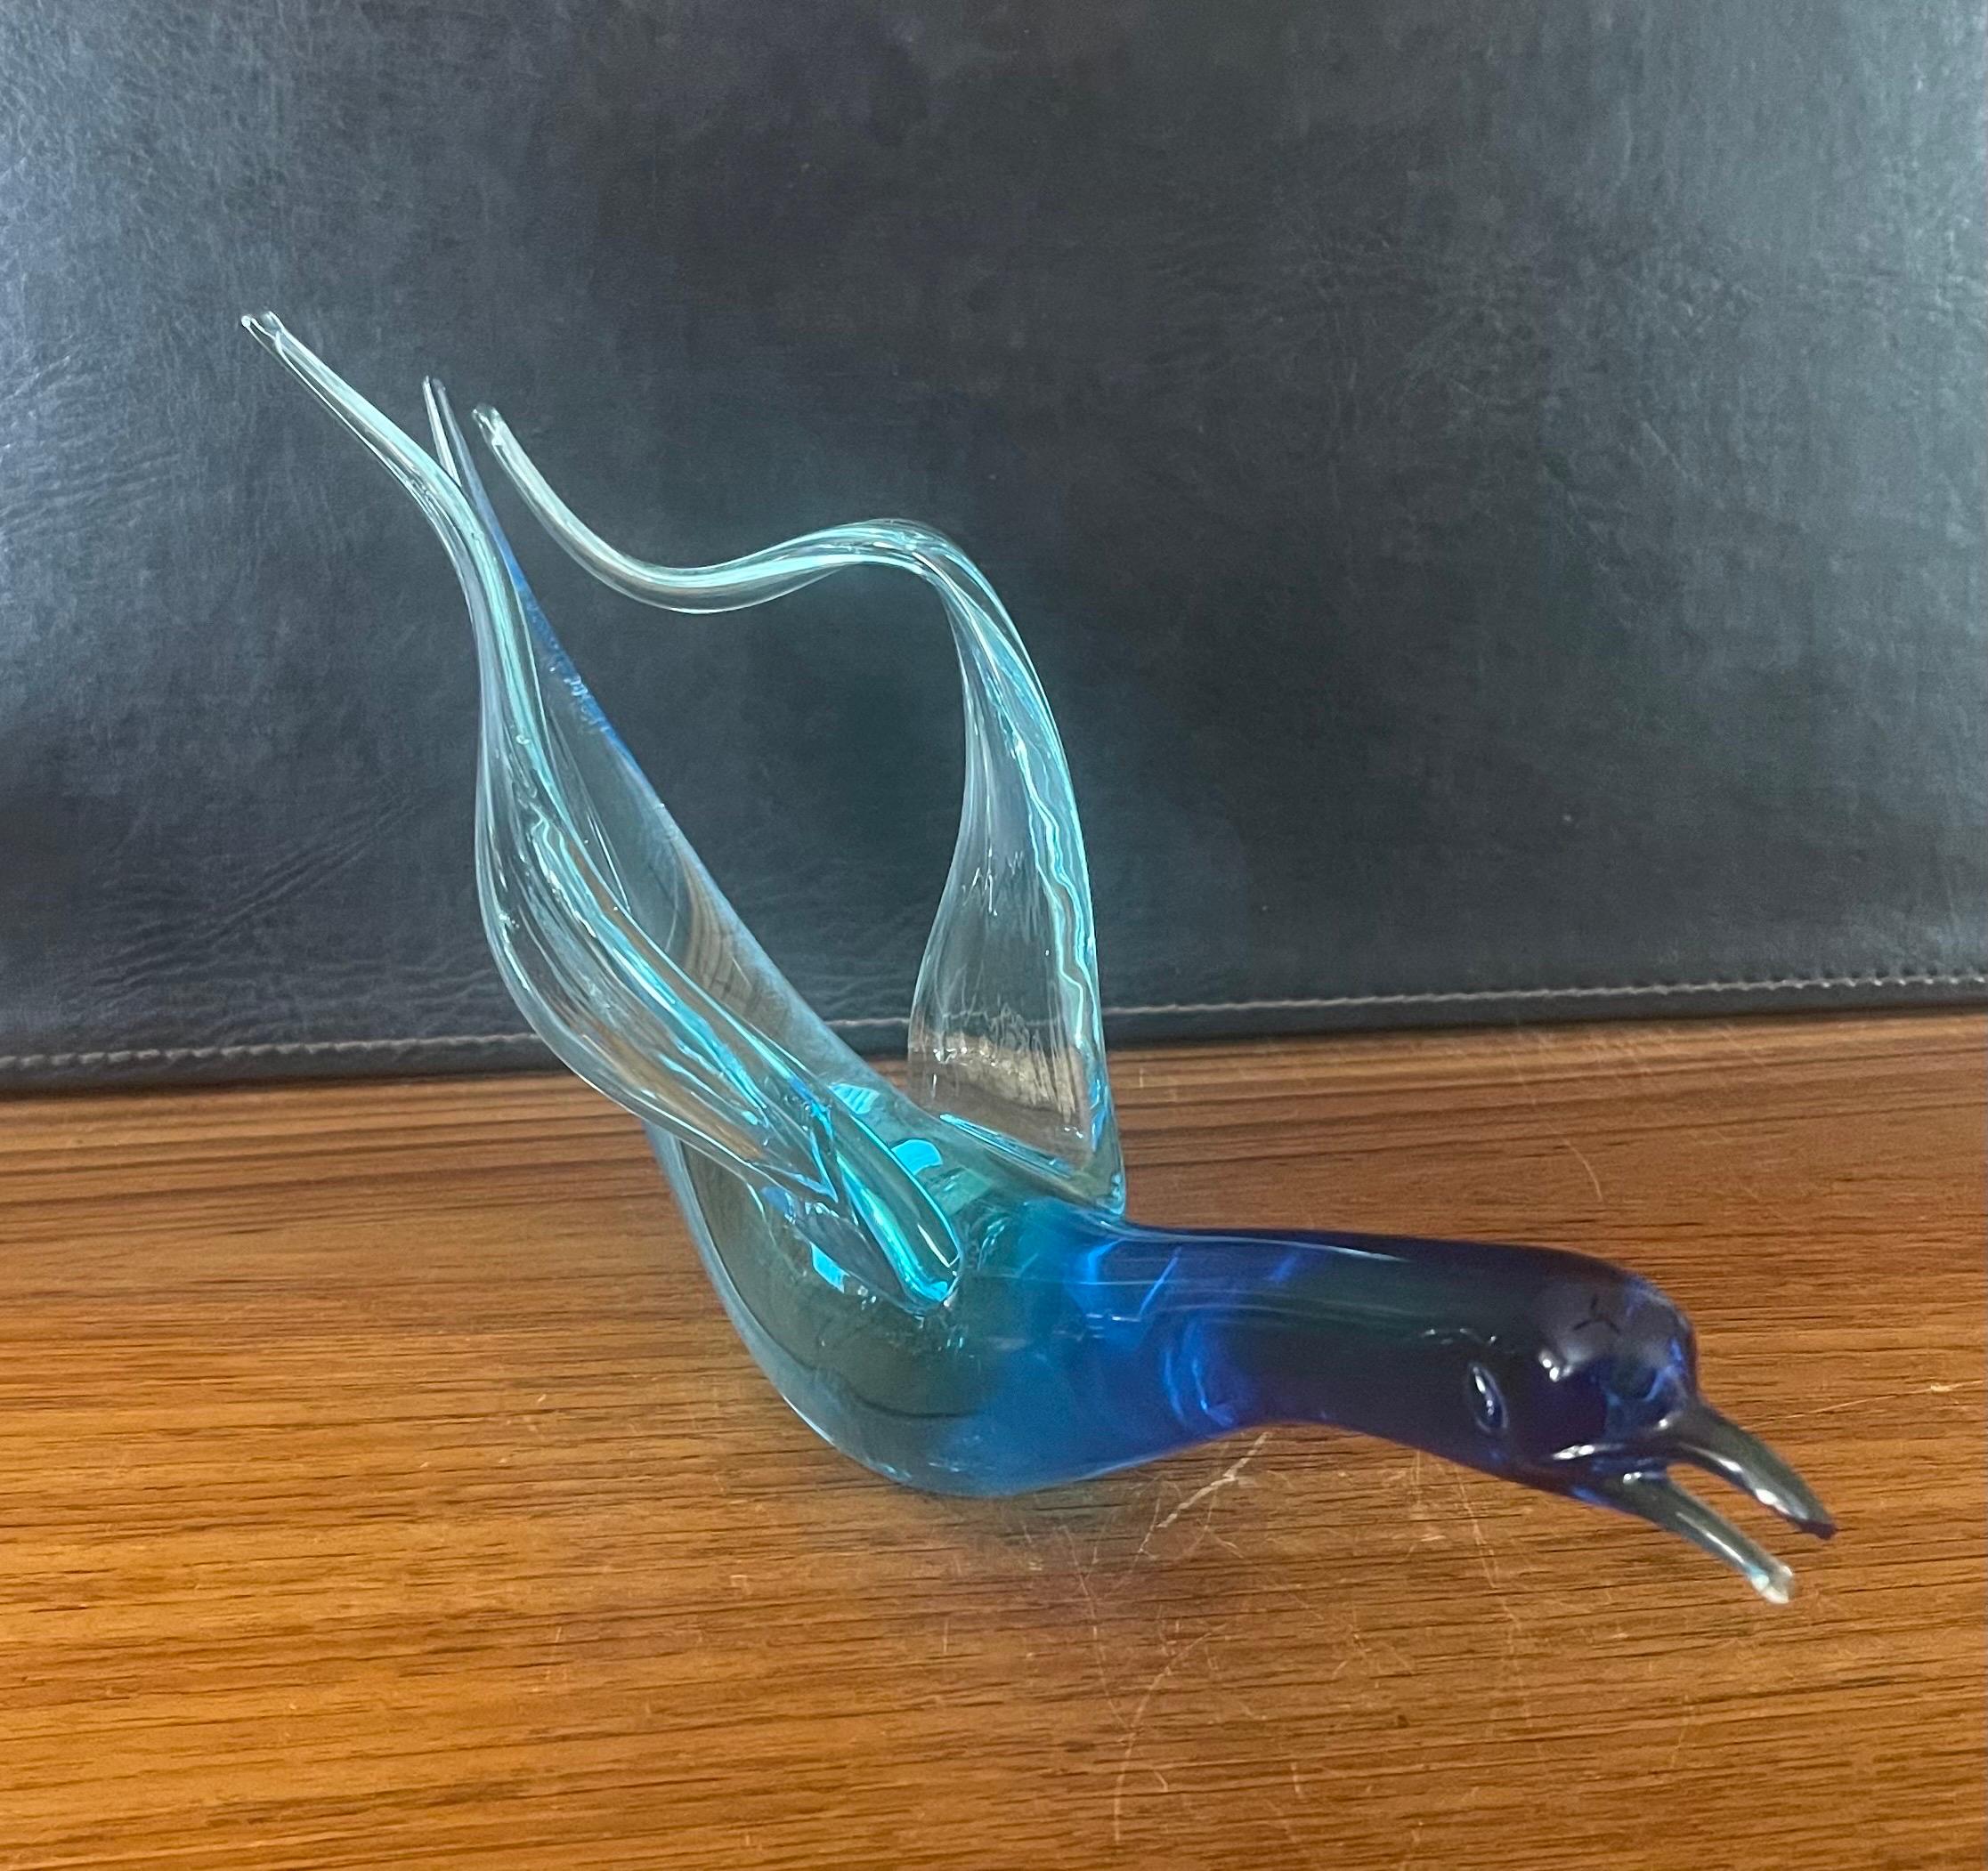 Stylish swimming swan art glass sculpture by Murano Glass, circa 1980s. The piece has a wonderful deep blue color and is in very good condition with no chips or cracks (some scratches on the underside). The sculpture measures 12.5